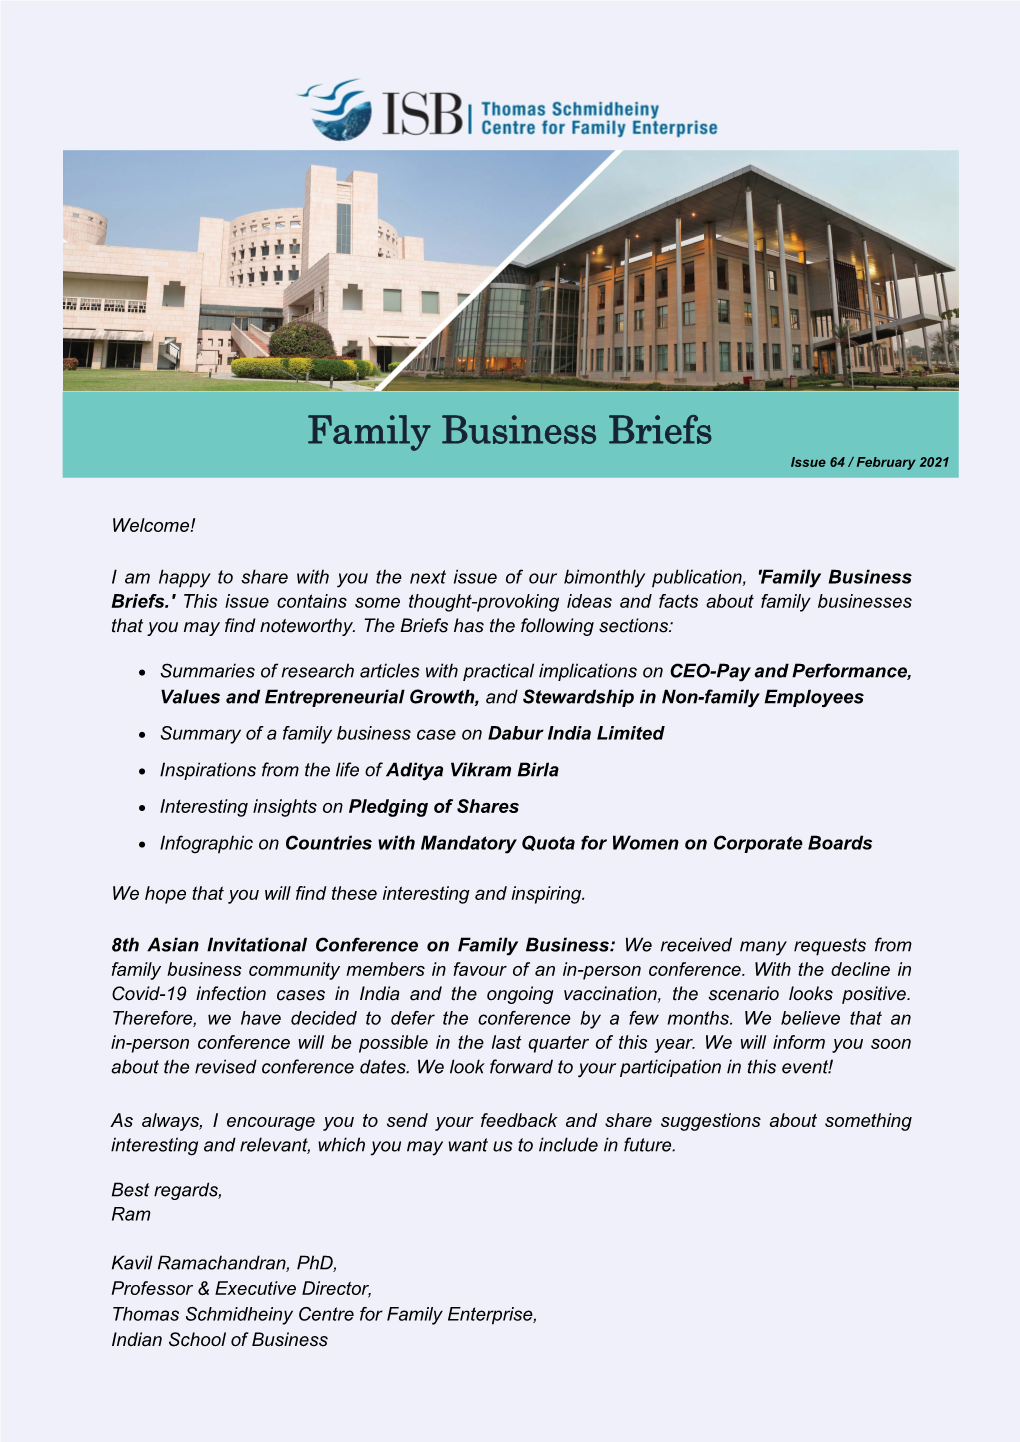 Family Business Briefs Issue 64 / February 2021